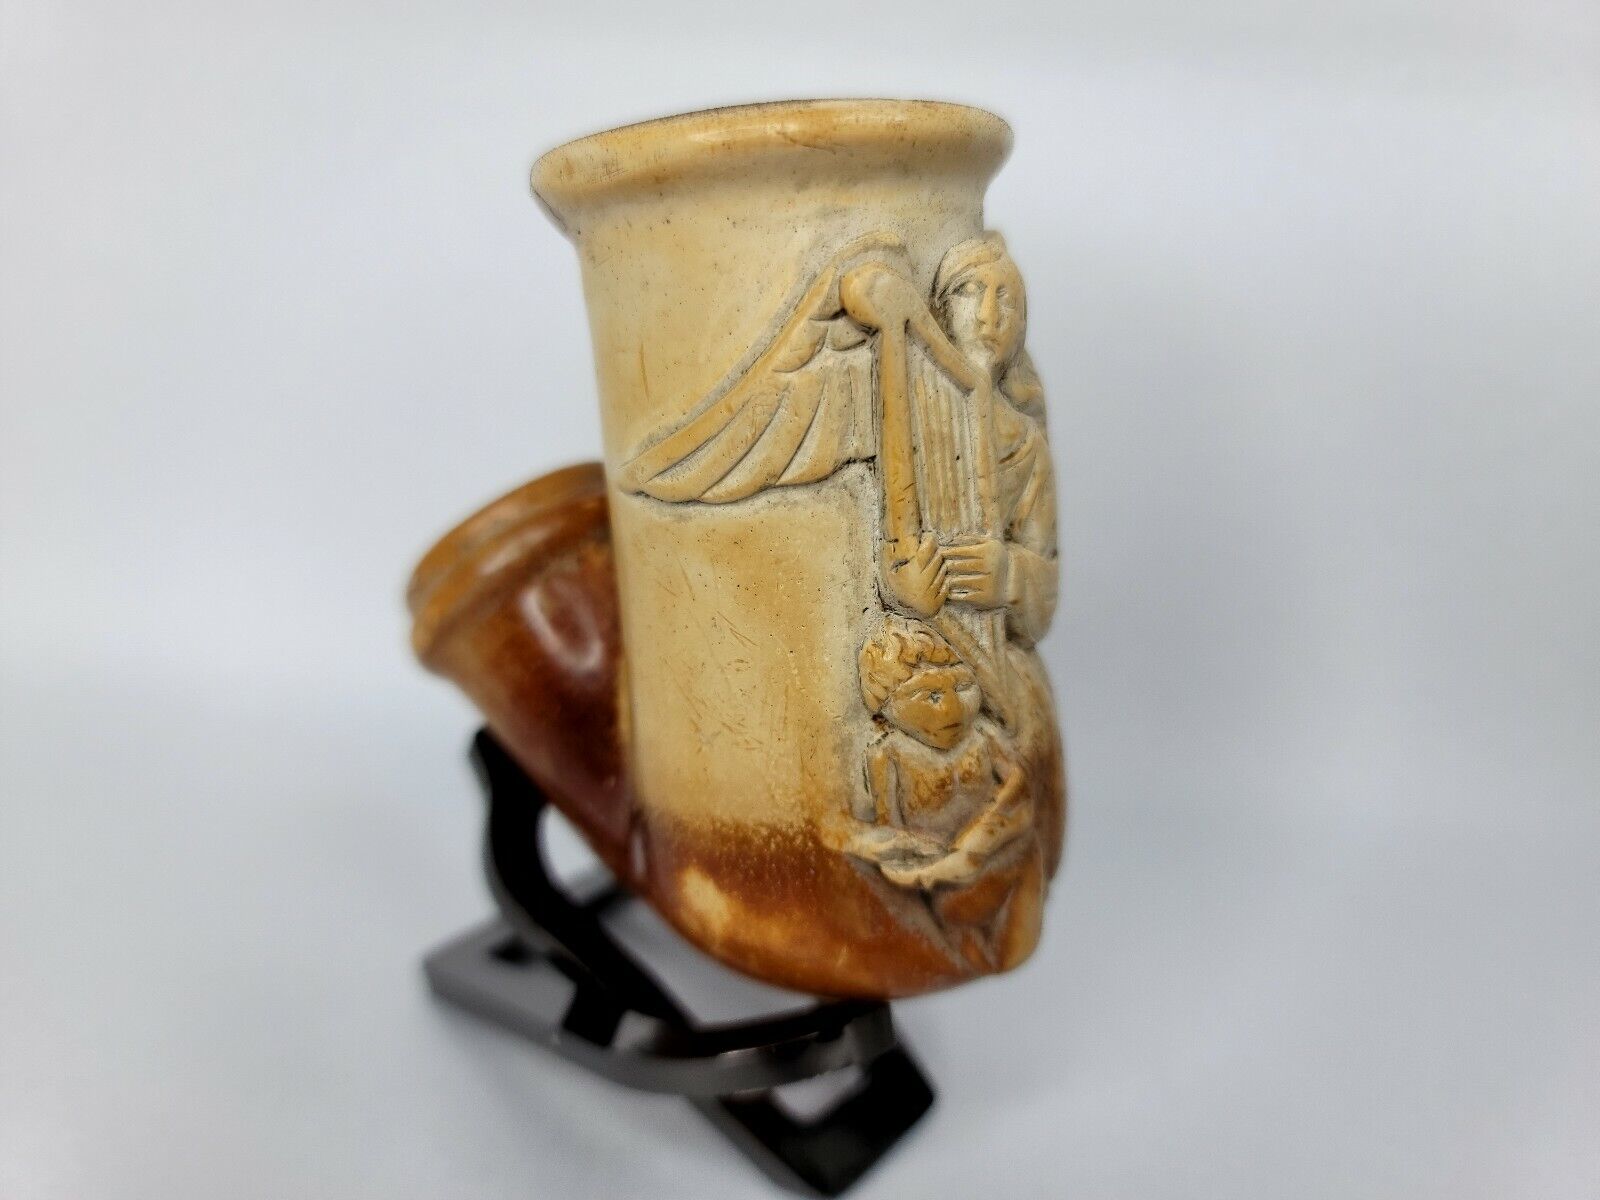 Rare Early 19th Century Meerschaum Tobacco Pipe Bowl Guardian Angel Playing Harp